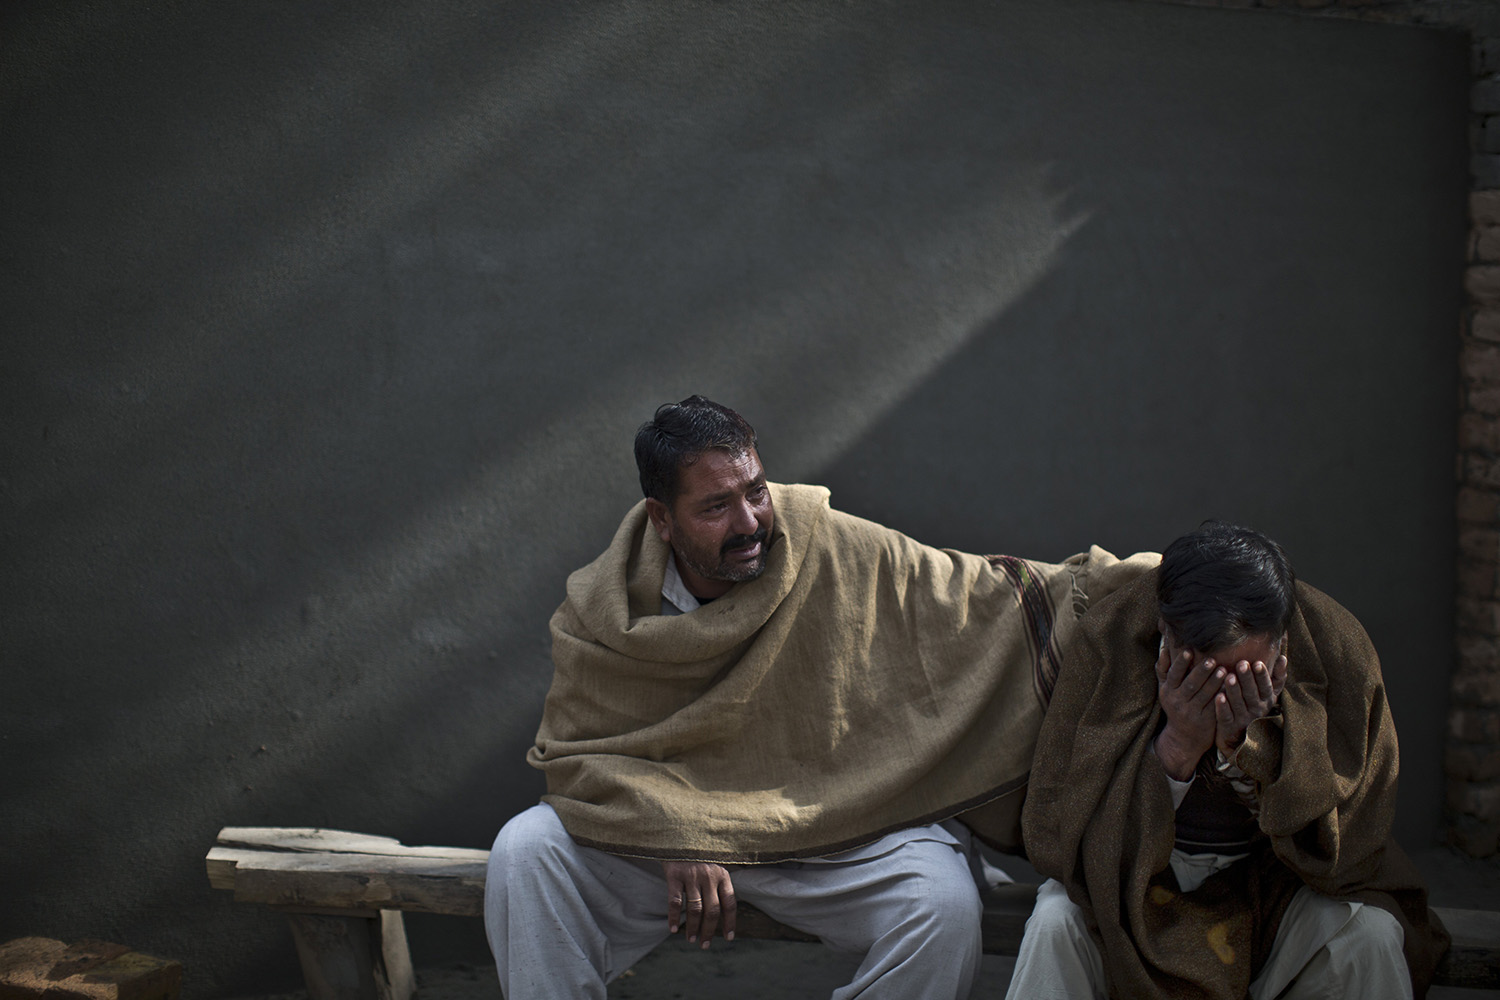 Jan. 20, 2014. Uncles of Pakistani student, Zoubair Latif, 17, who was killed in a suicide bombing, mourn his death while waiting at a hospital to take the body for burial, in Rawalpindi, Pakistan.